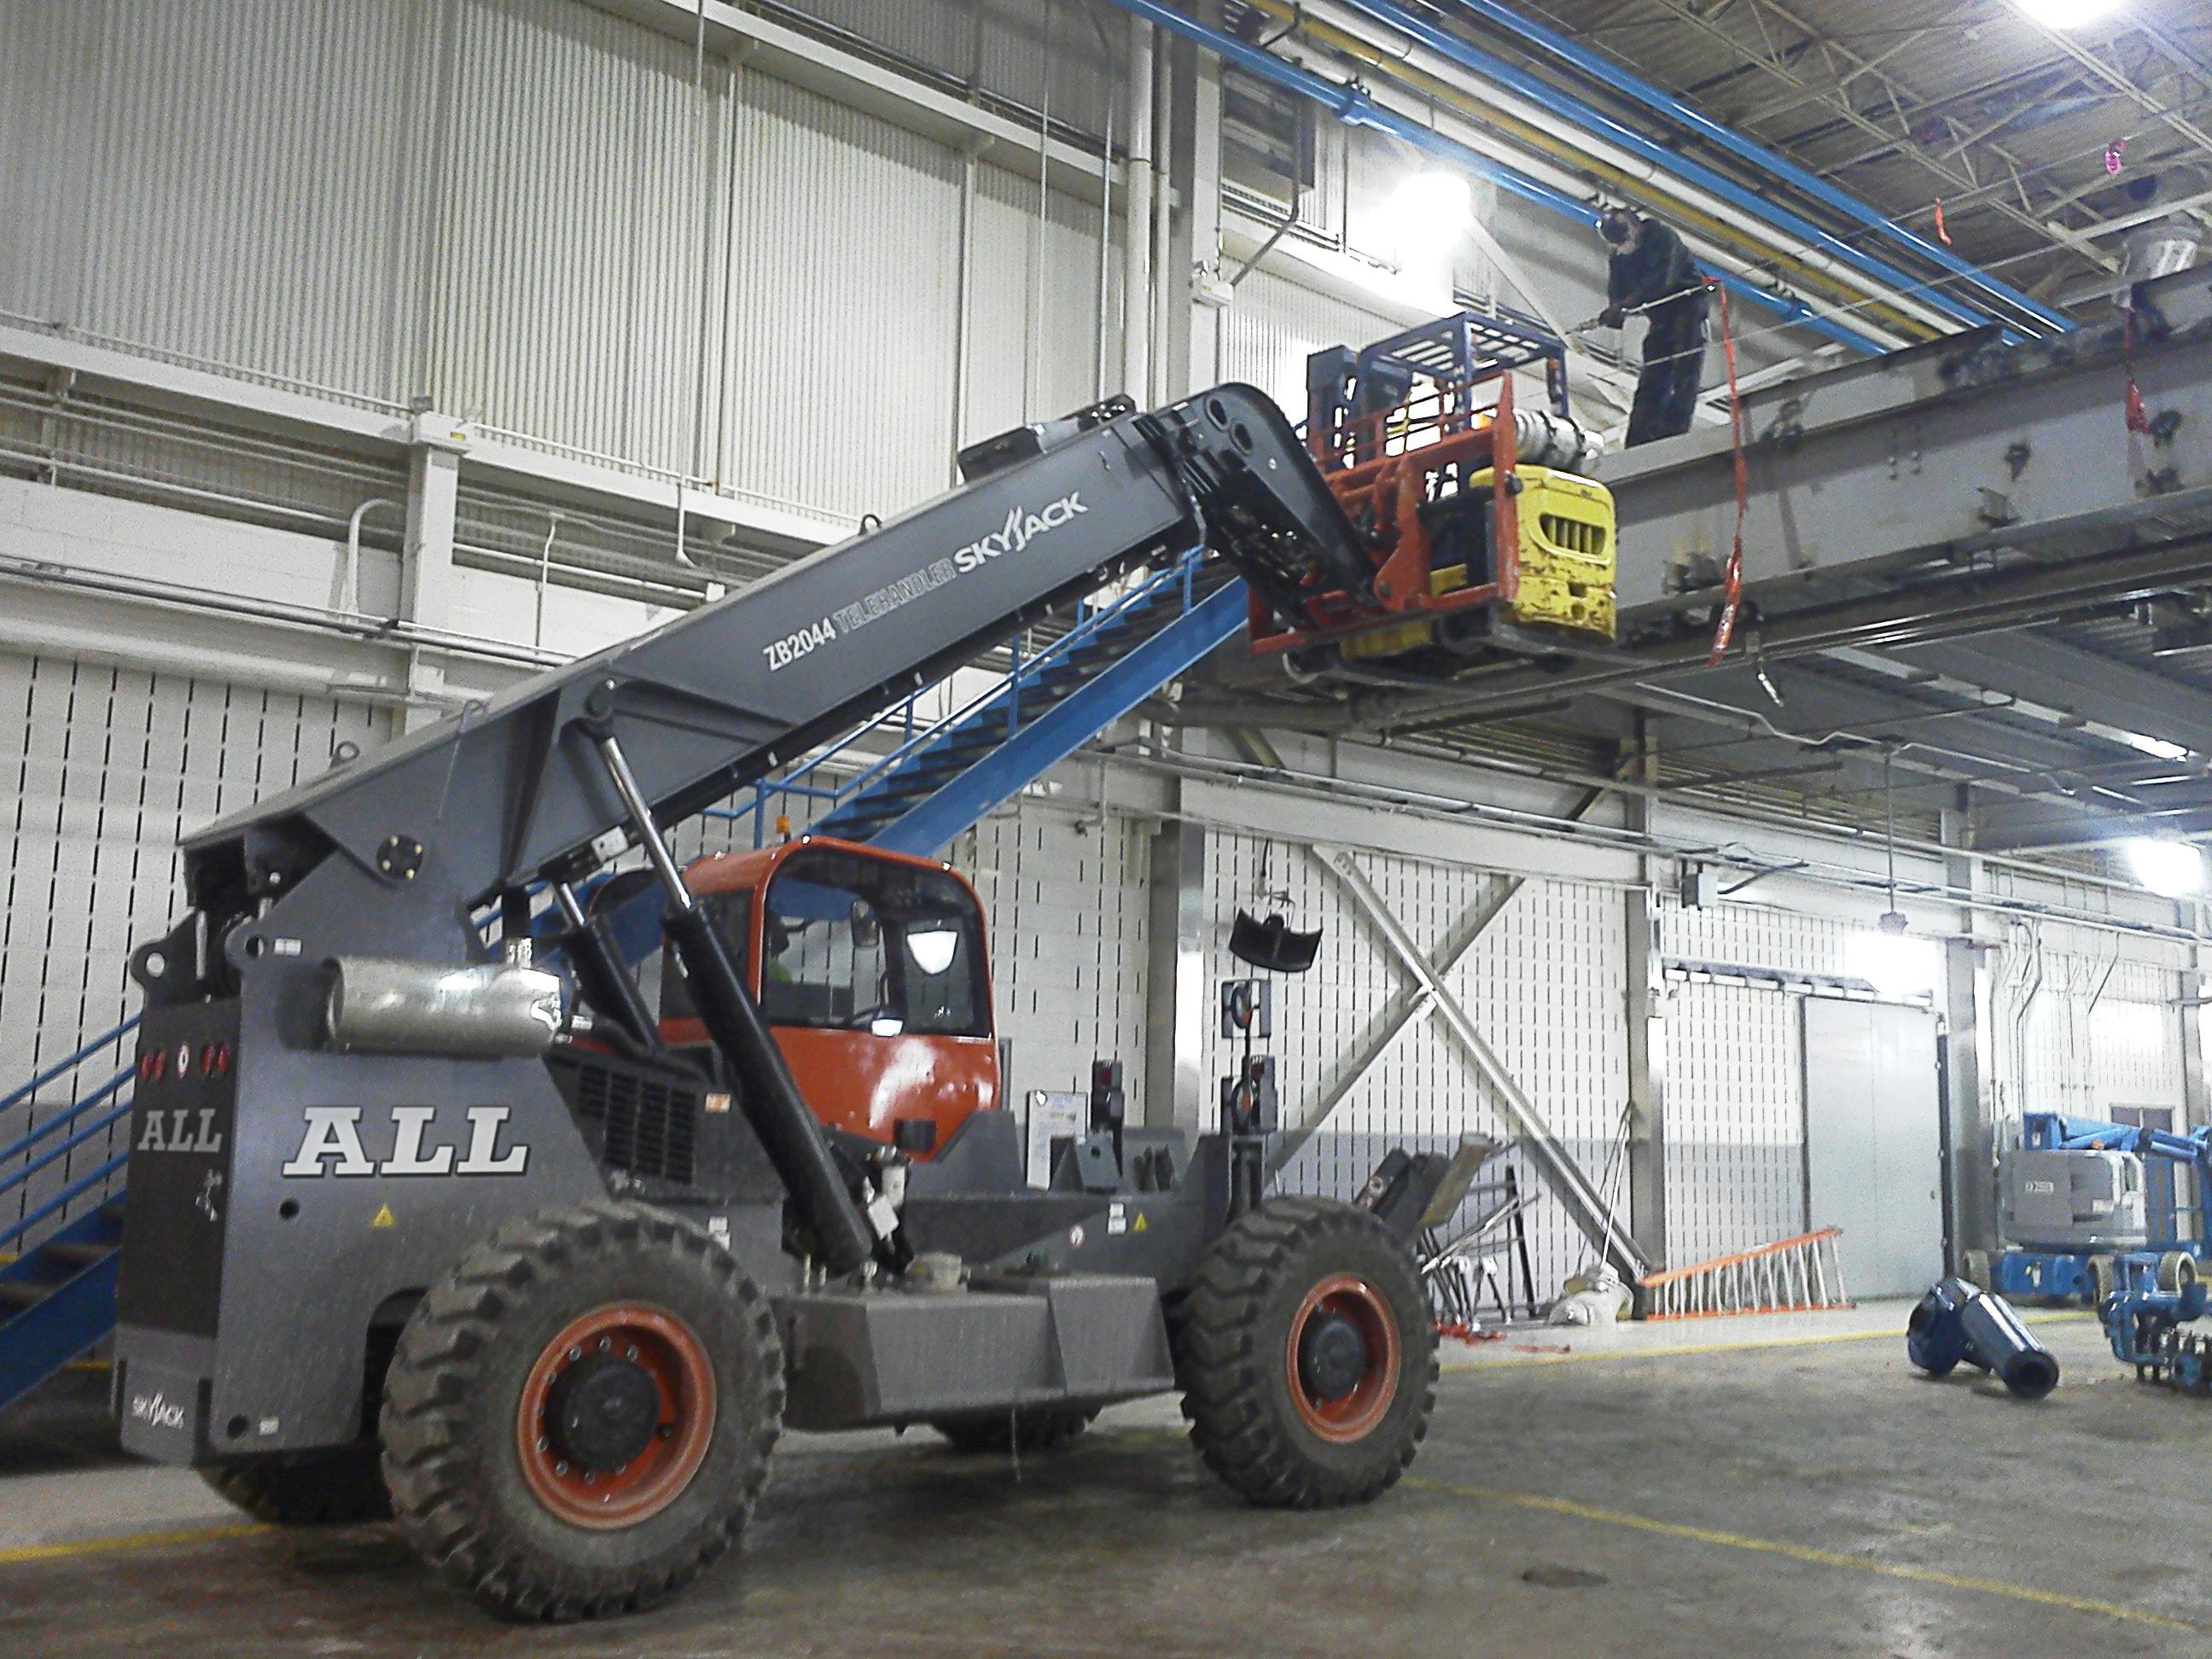 ALL Erection & Crane Rental Purchases Two New Skyjack 20,000-Lb. Capacity Telehandlers | Construction News